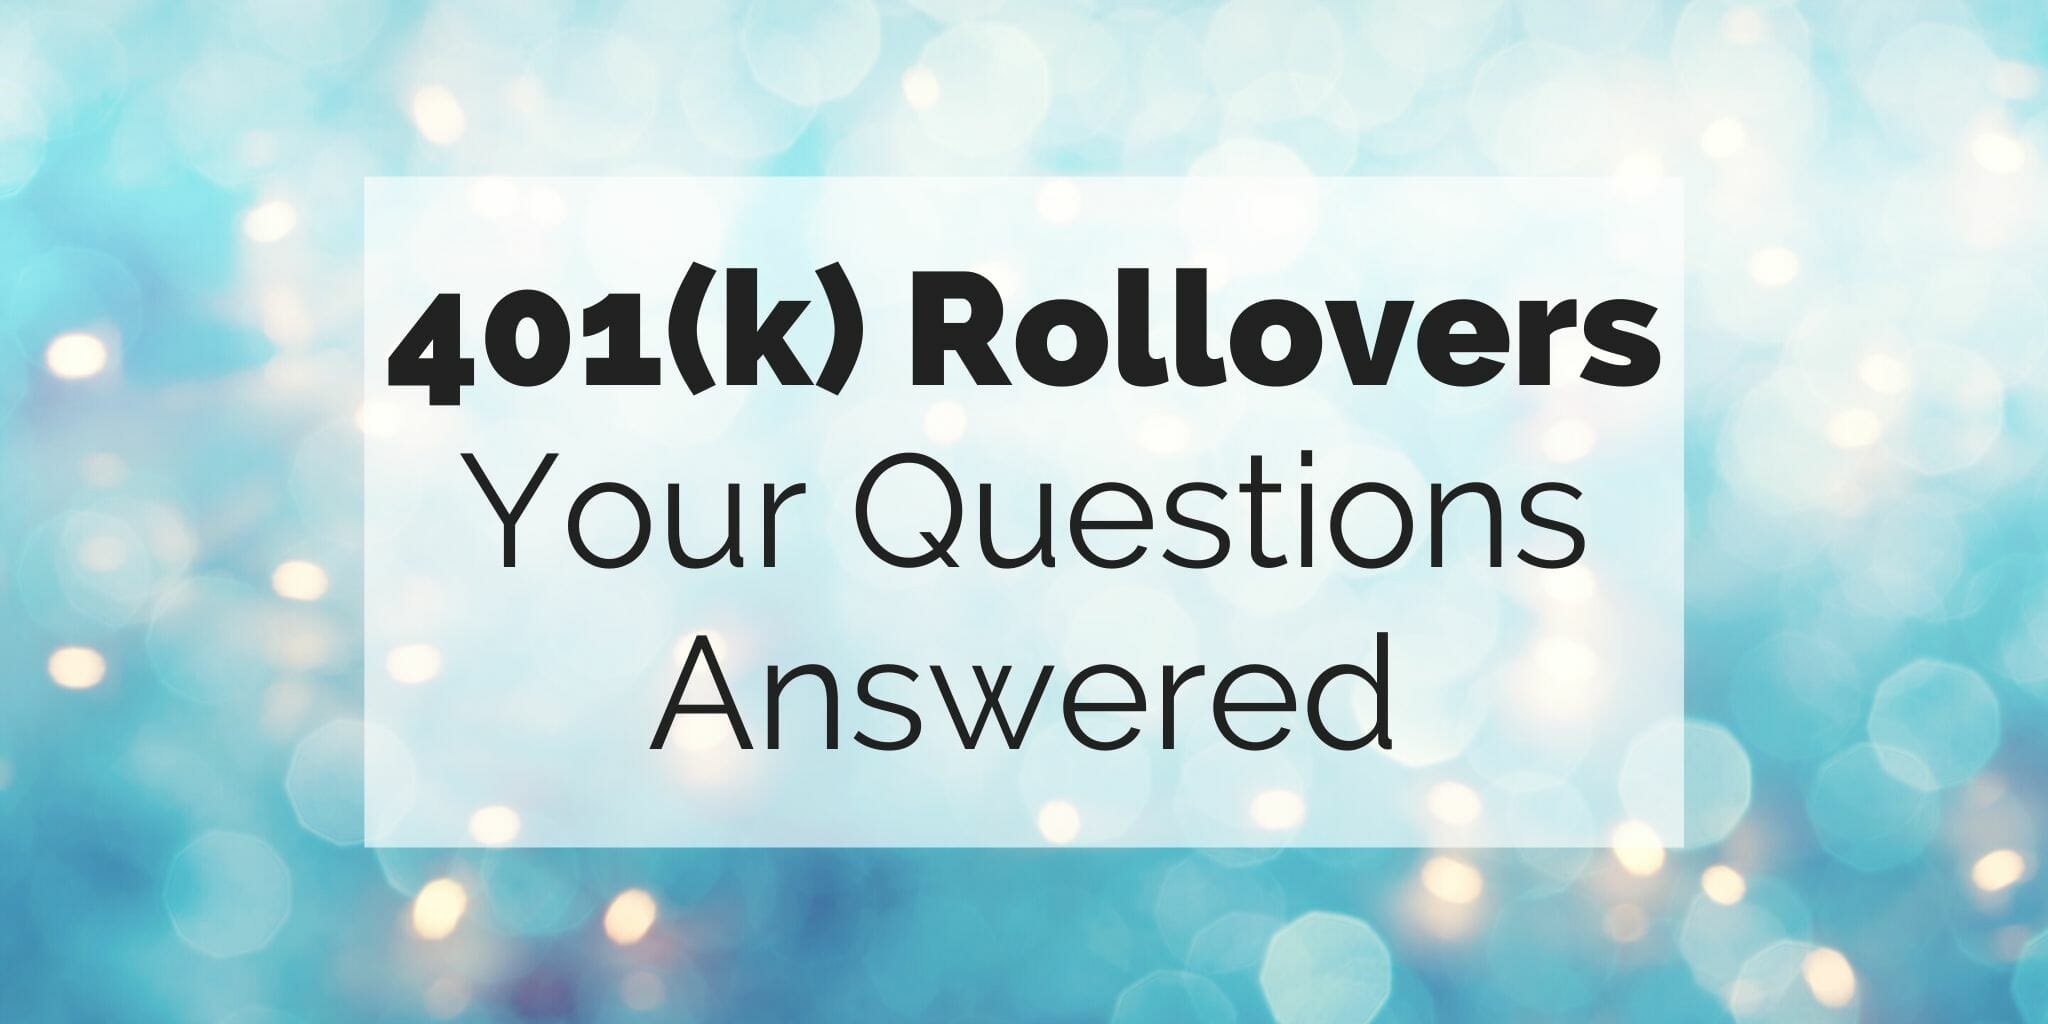 401k Rollovers: Can I Rollover a 401k to an IRA?